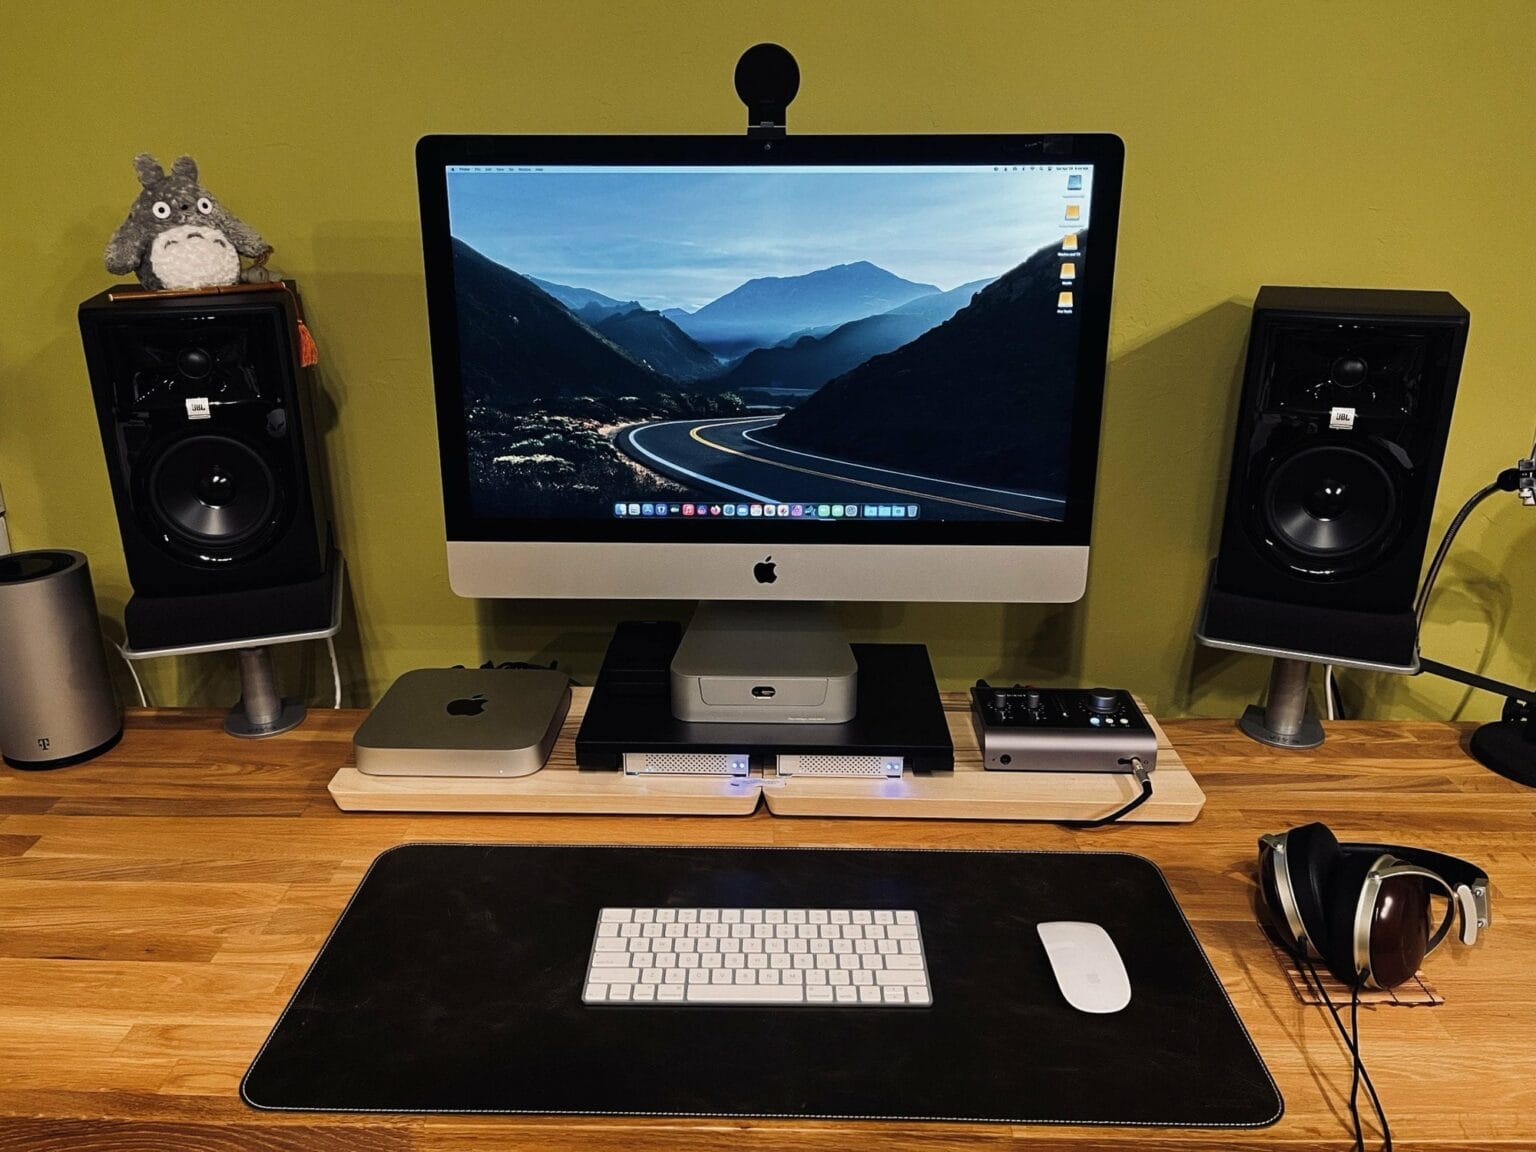 The user learned how to convert the 5K iMac display from a video.